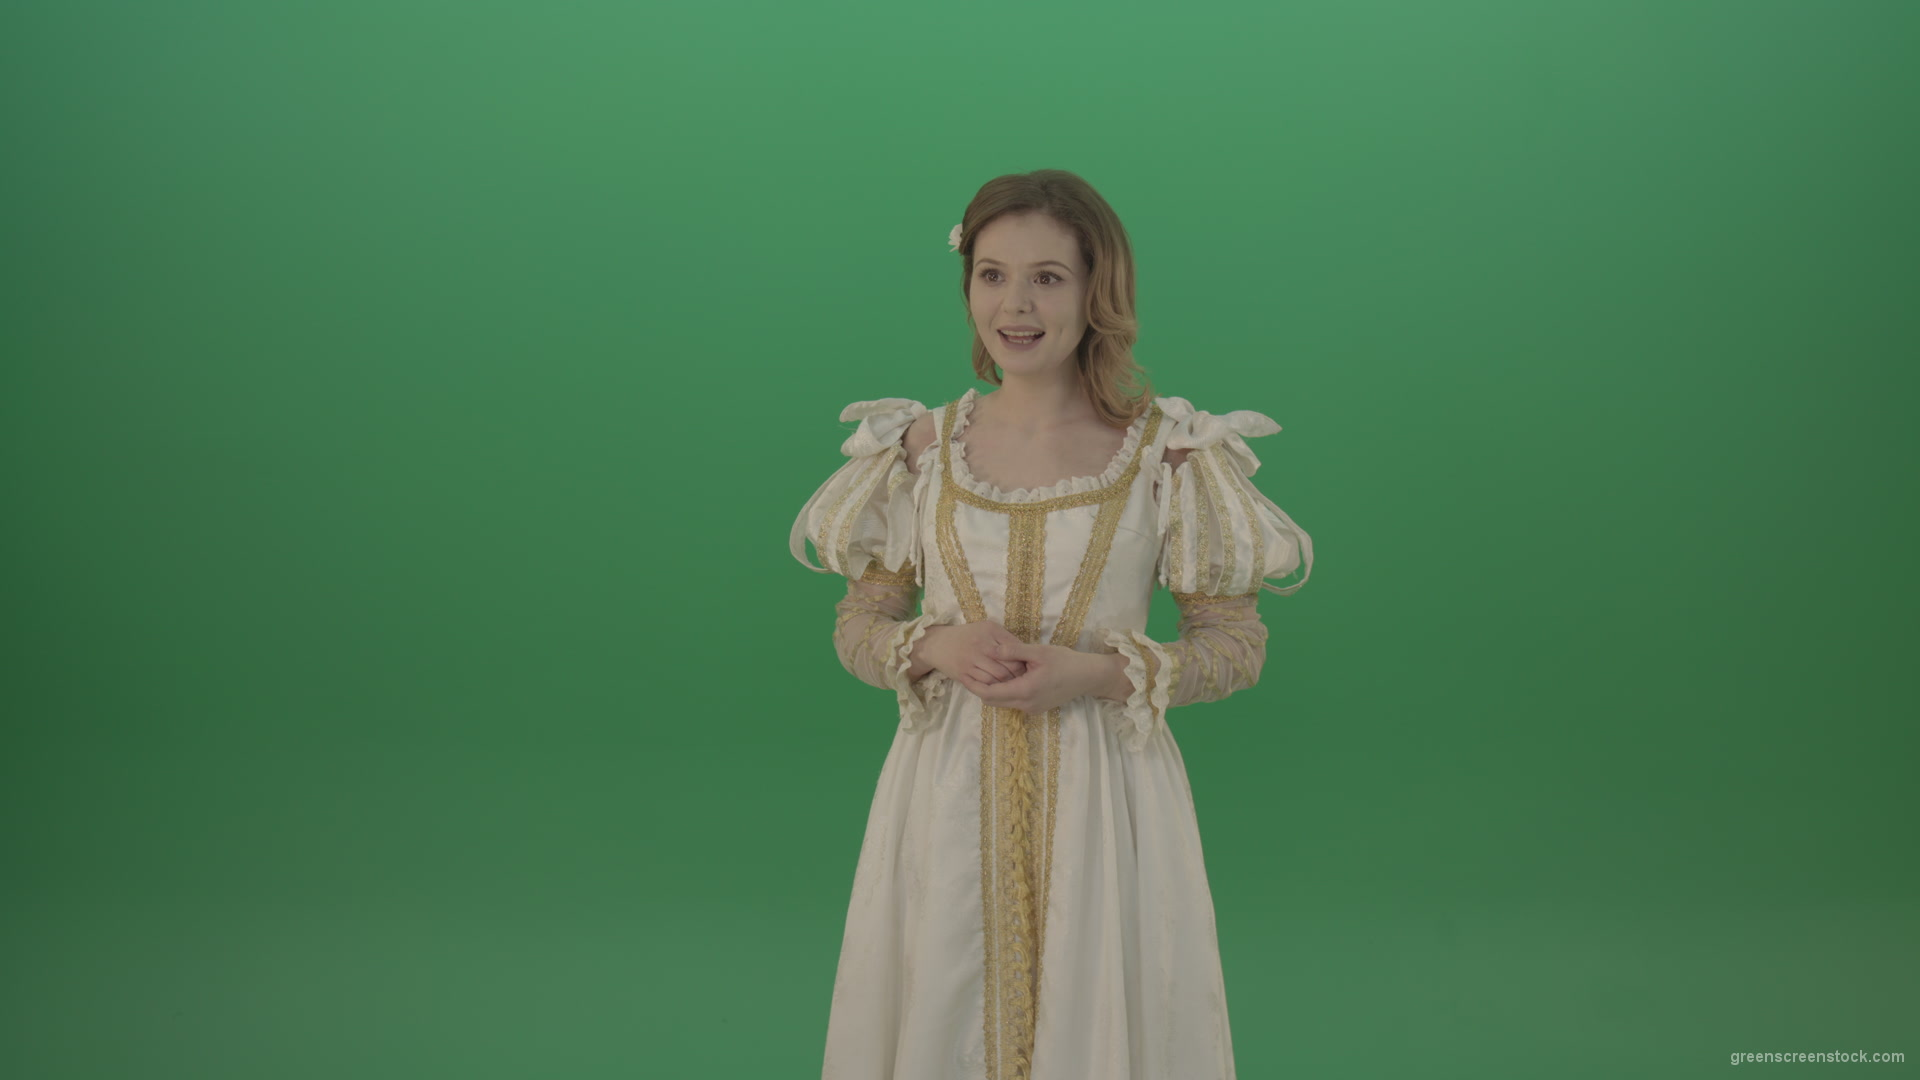 Medieval-girl-in-a-white-suit-looking-far-away-isolated-on-green-background_004 Green Screen Stock